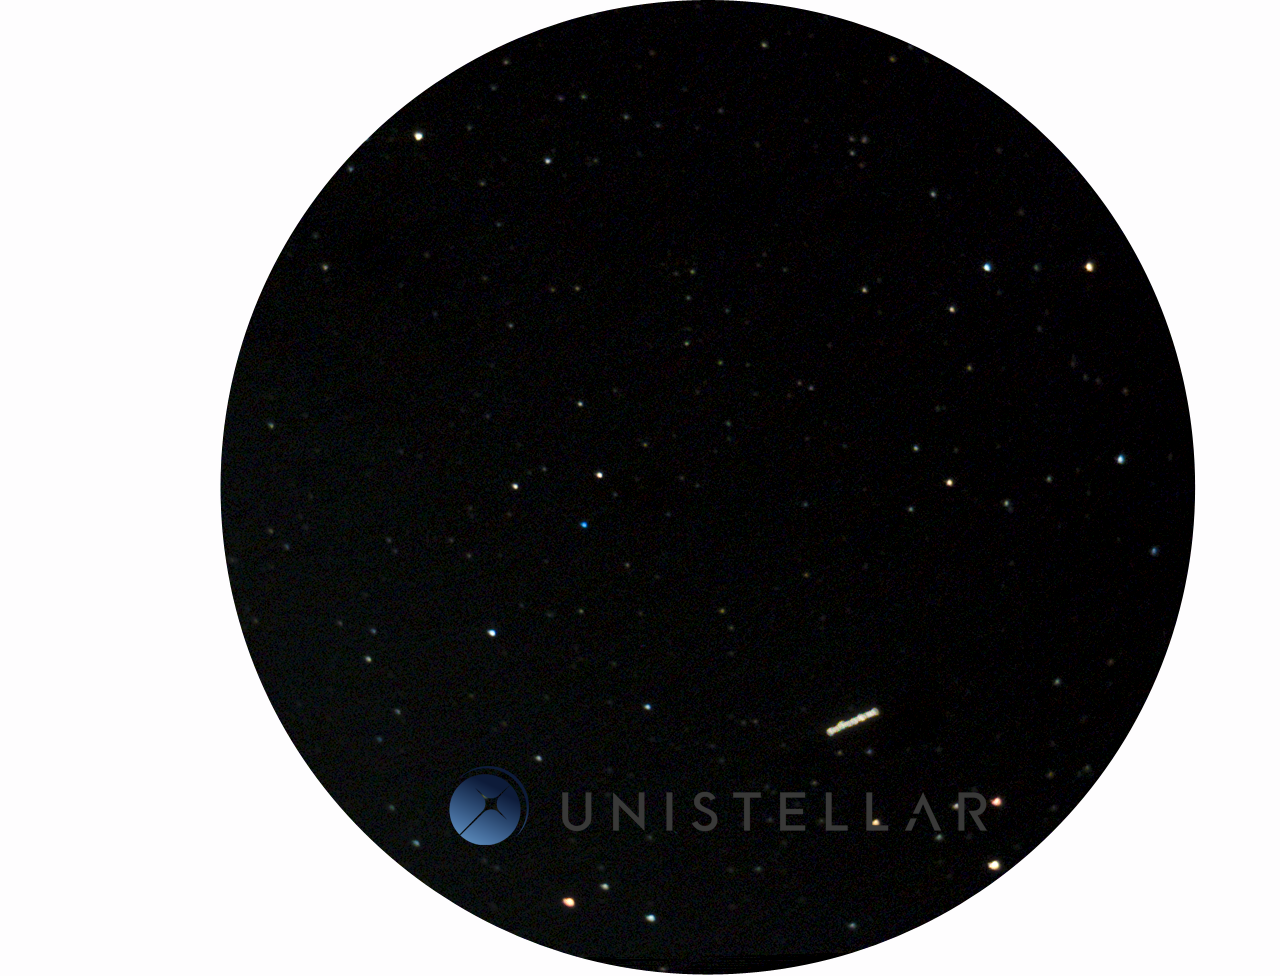 Three-min observation of the asteroid (3122) Florence seen in the eyepiece of the eVscope prototype. (Credit: Unistellar)